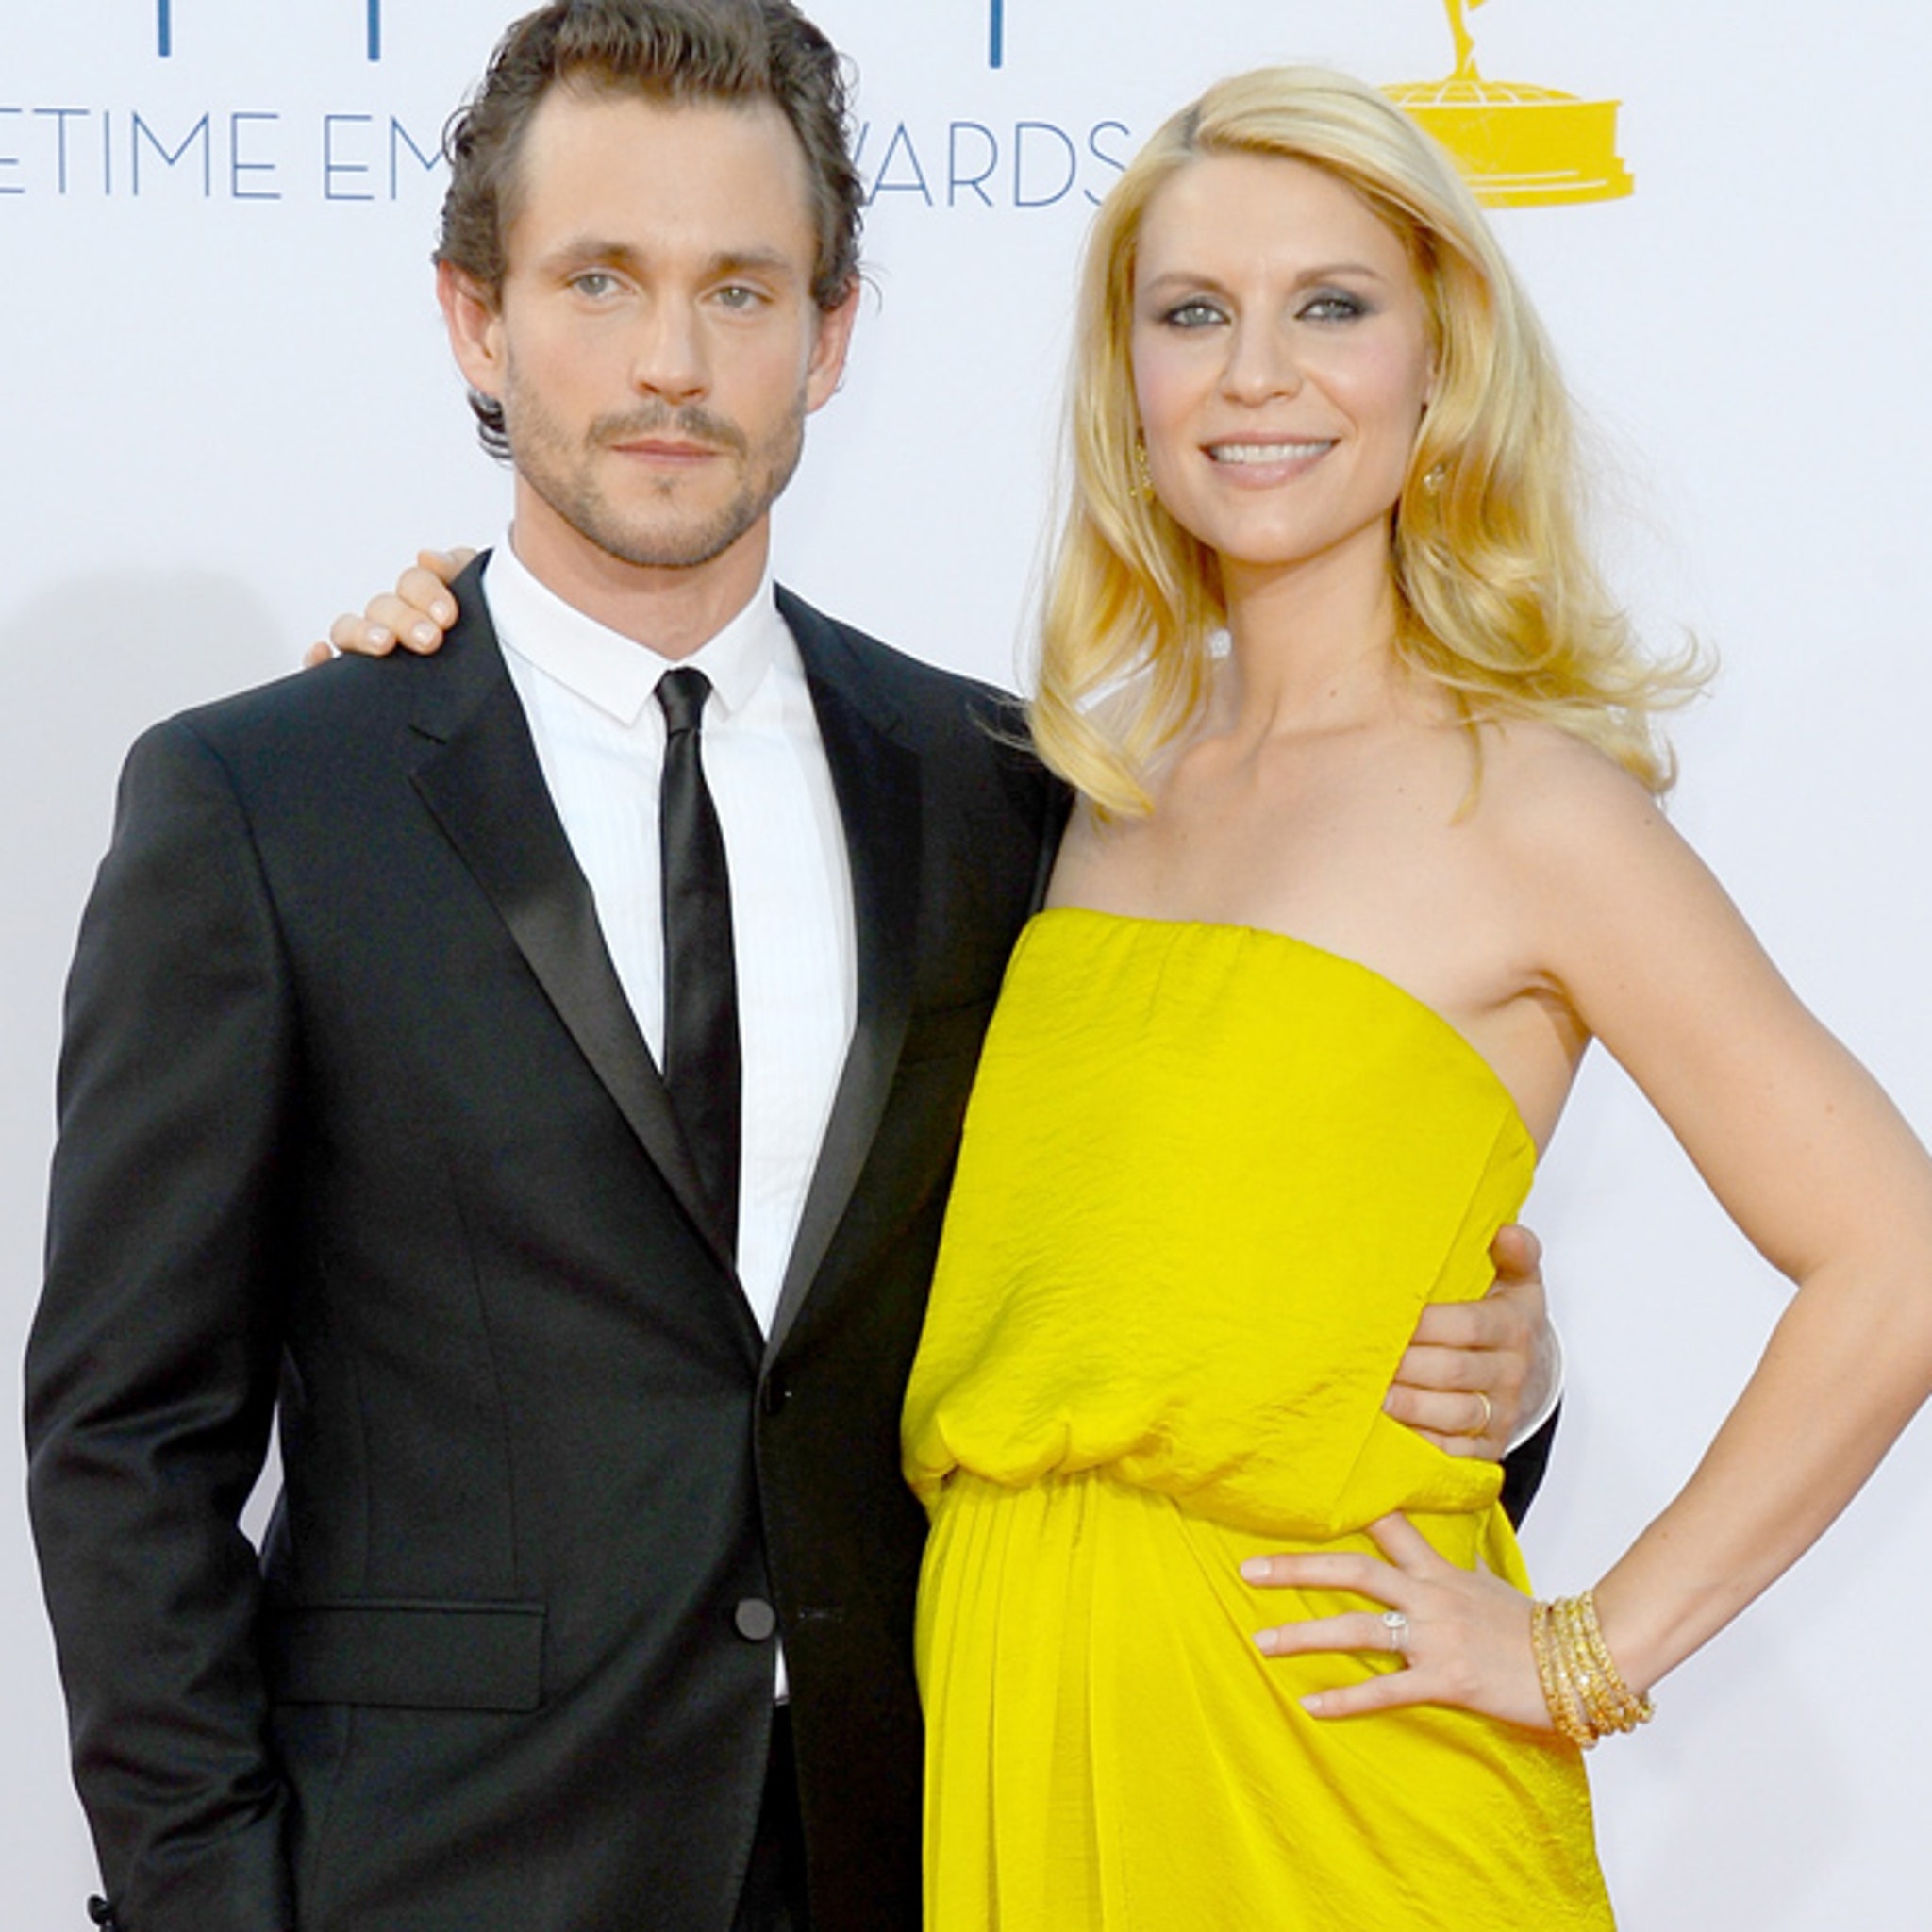 Claire Danes and Husband Hugh Dancy Welcome Baby No. 3: Report